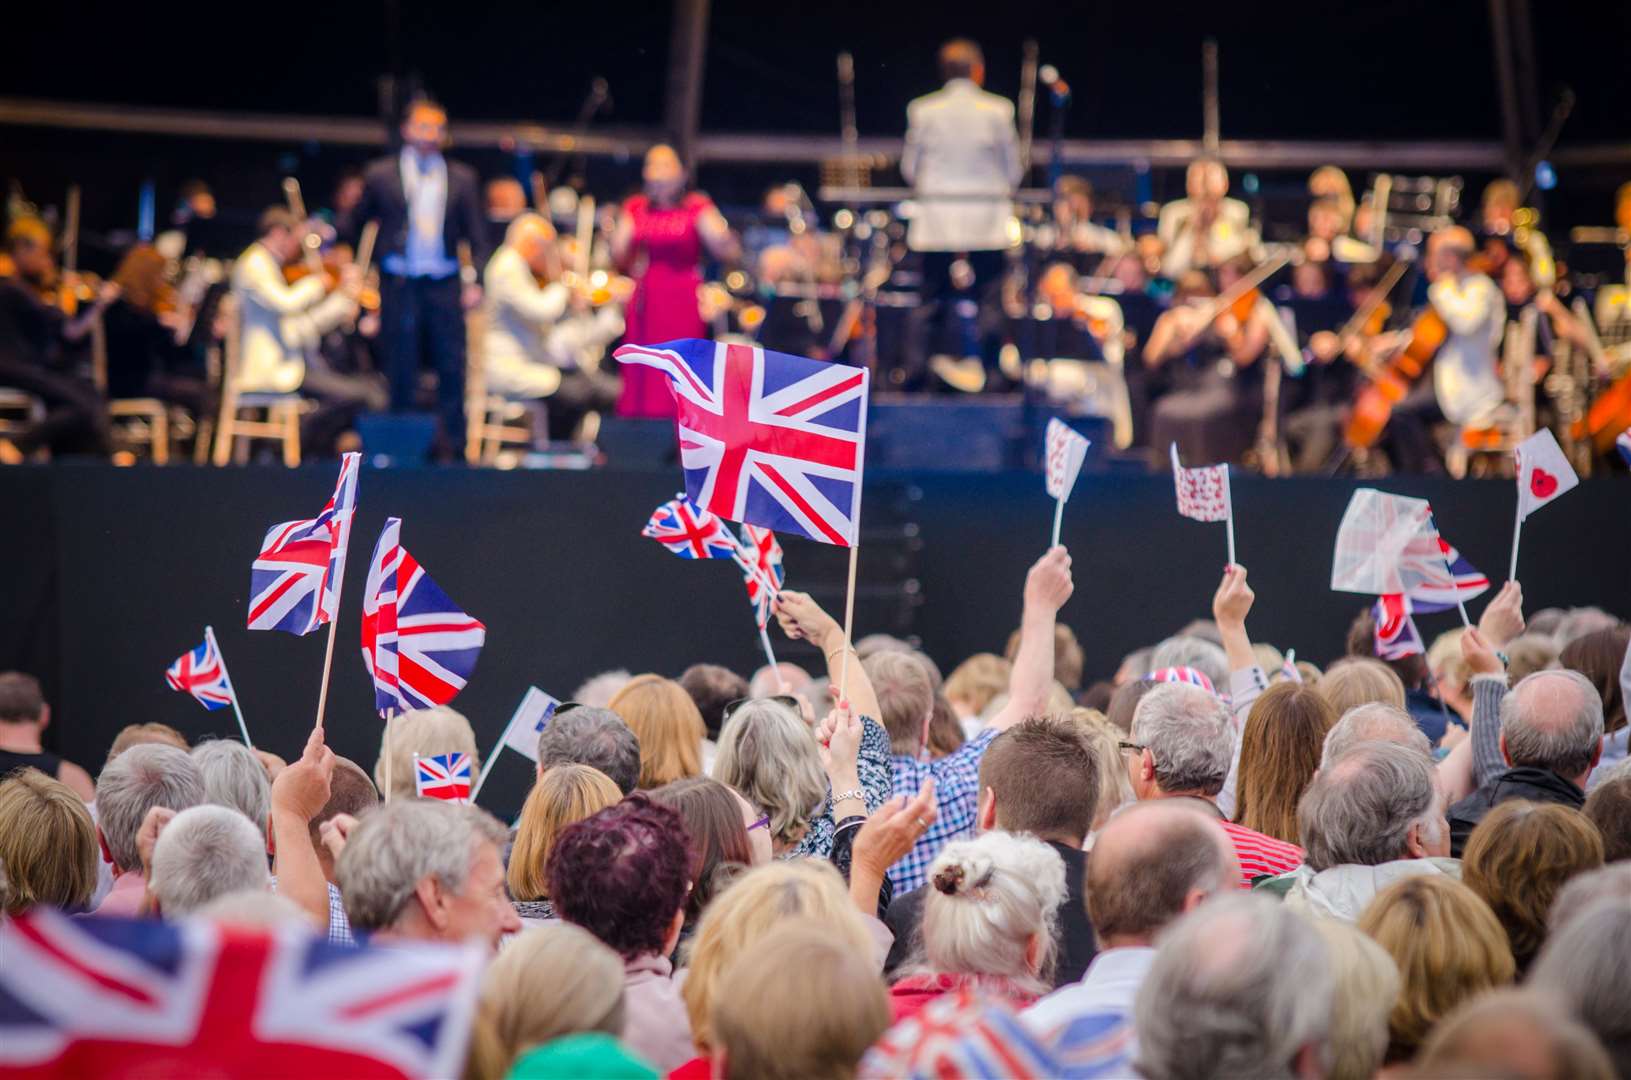 Be close to the stage at the Leeds Castle Concert with our competition